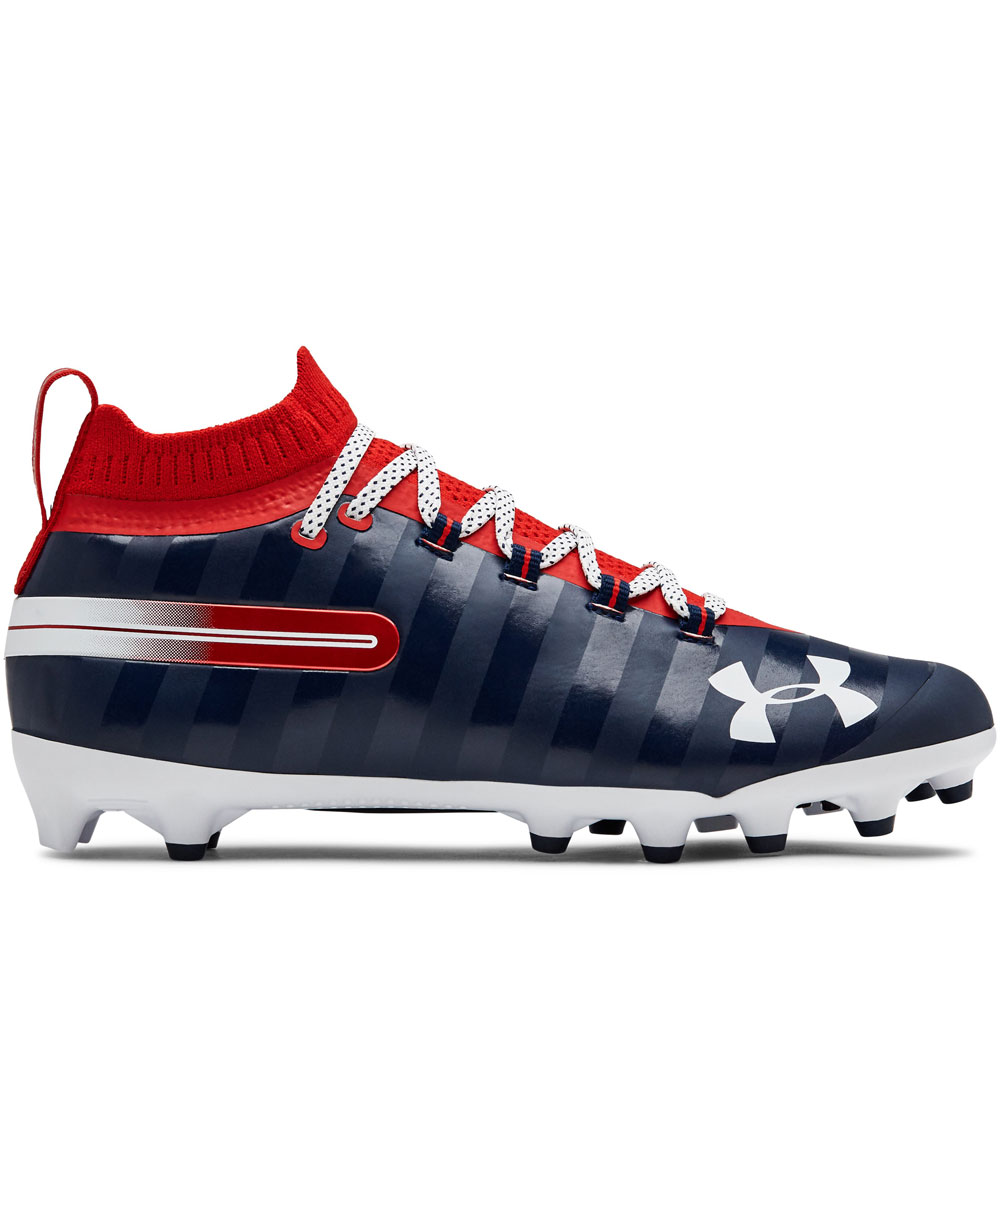 under armour cleats american football